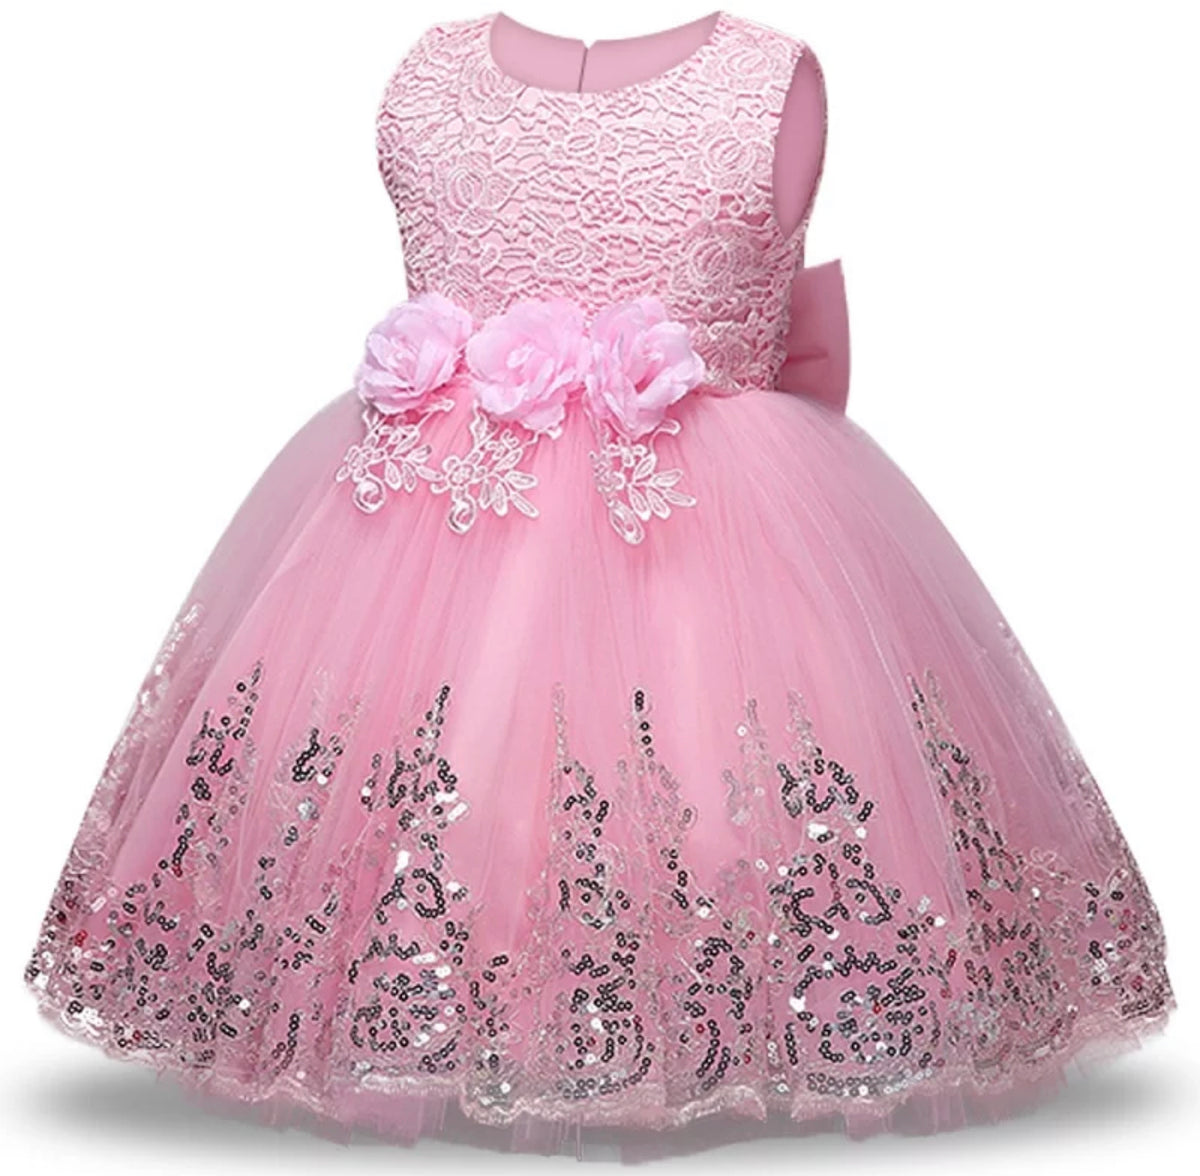 Pretty in Pink Princess Tulle Dress